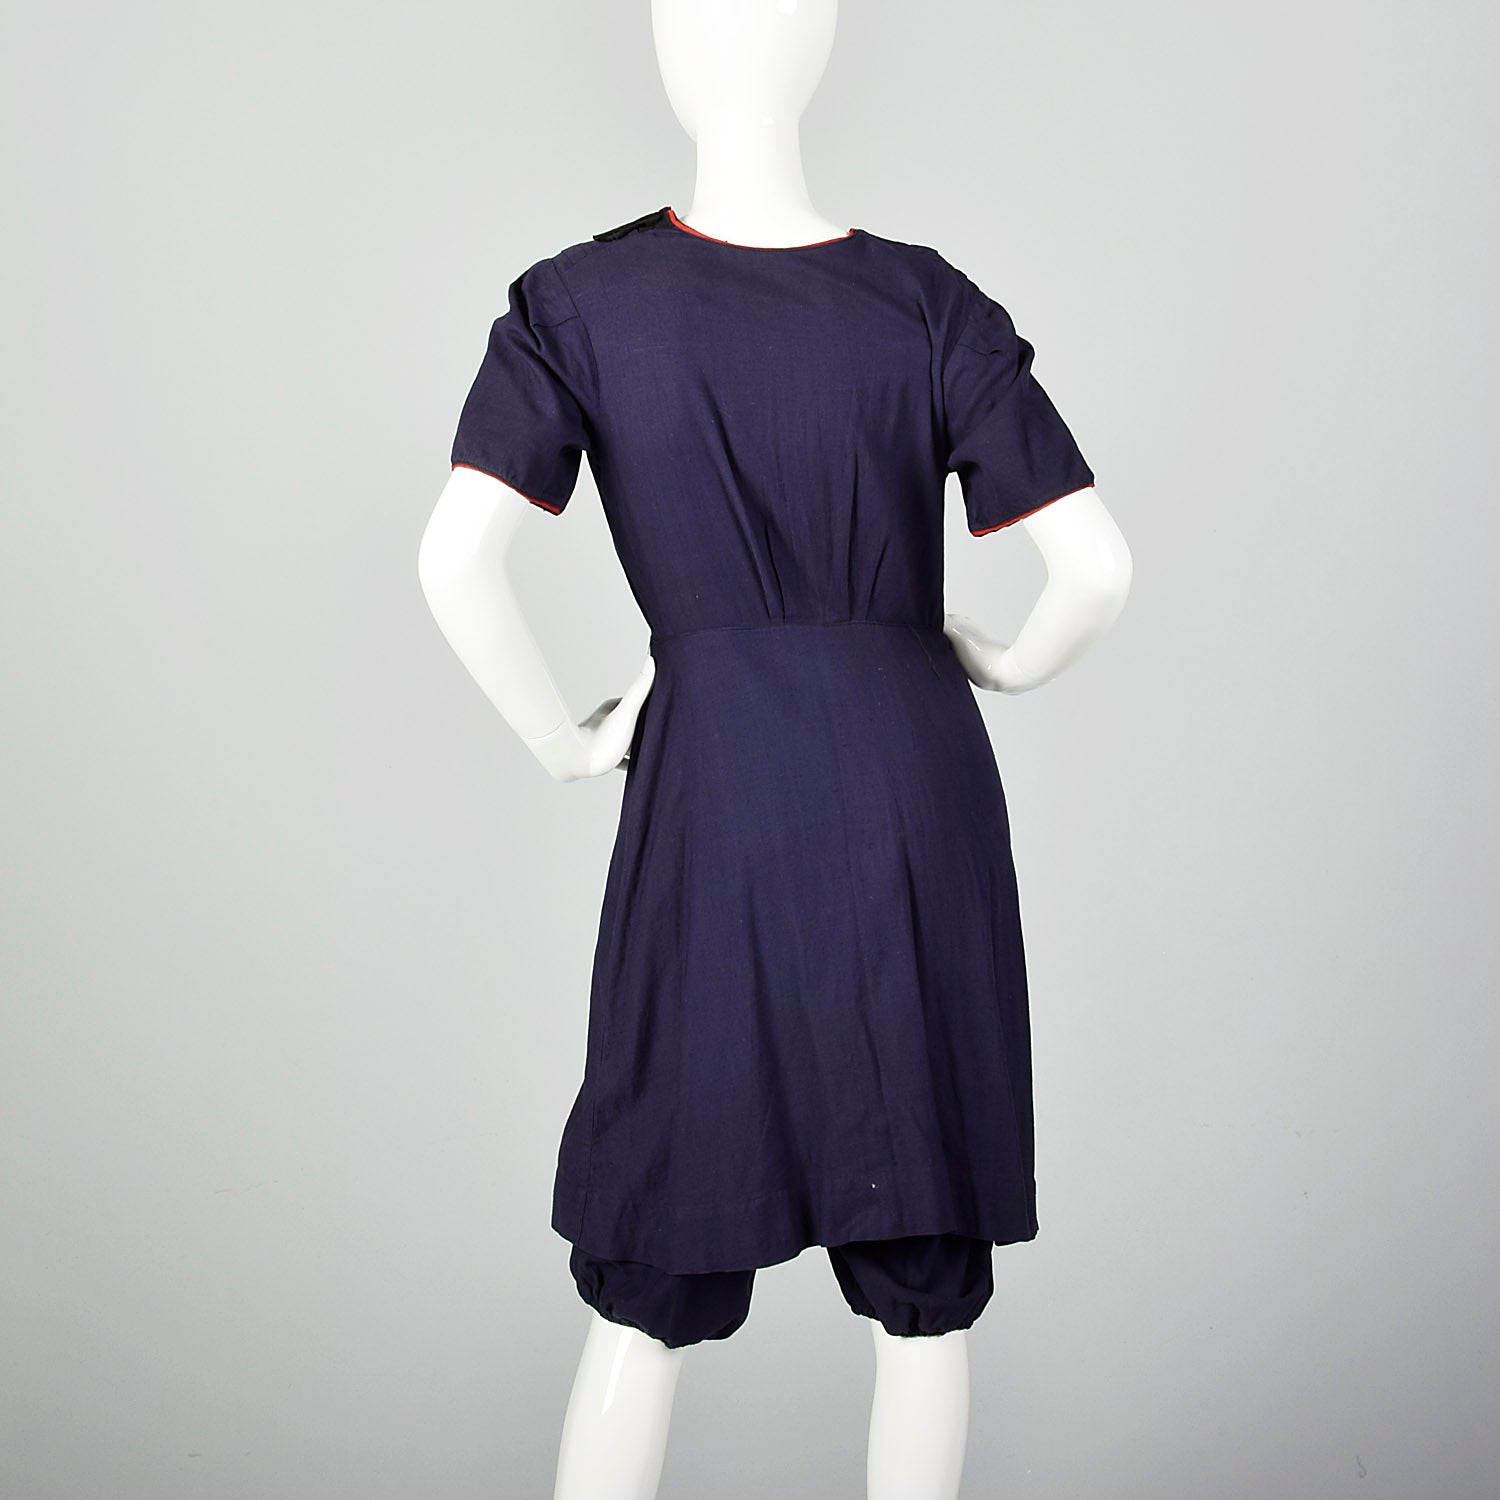 Small Early 1900s Swimsuit One Piece